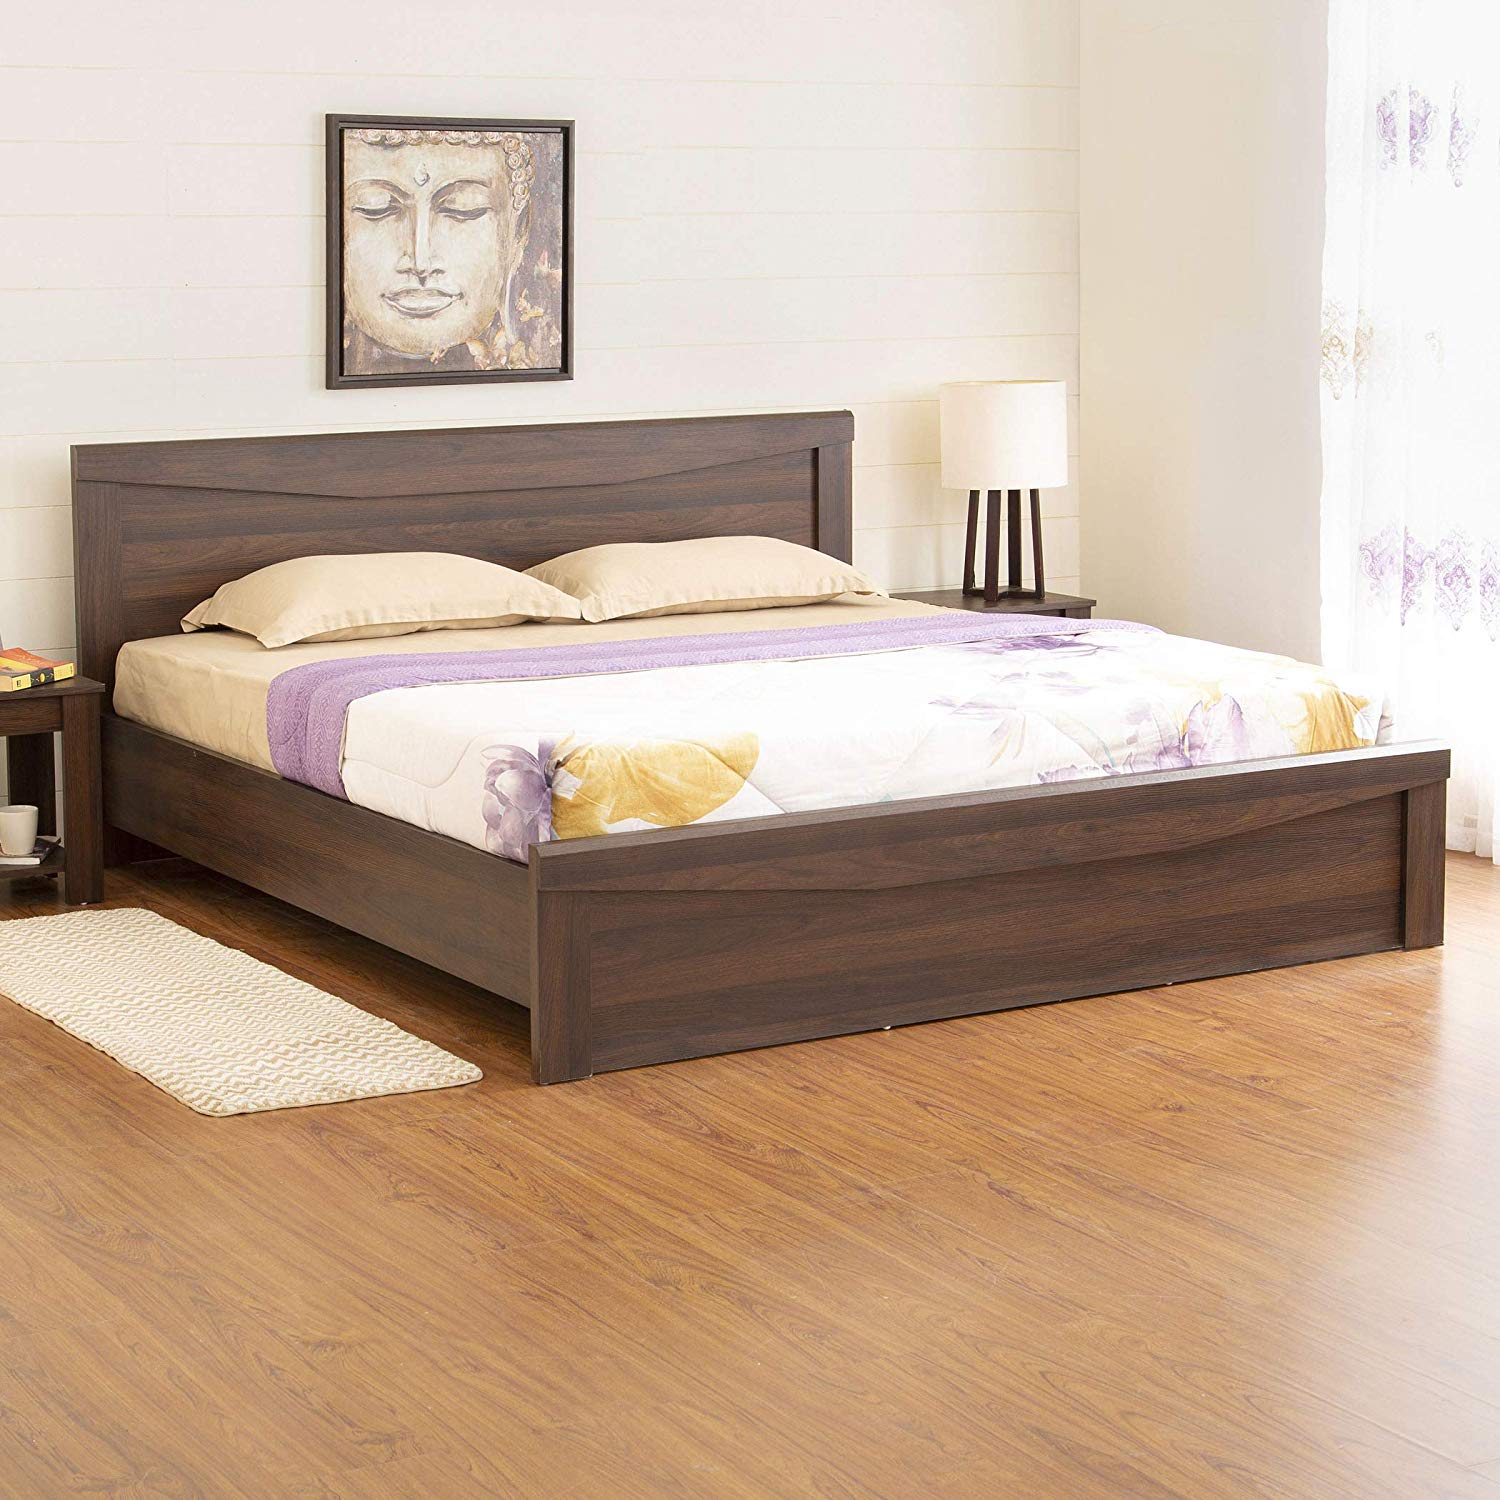 Home Centre Lewis Vega Queen-Size Bed